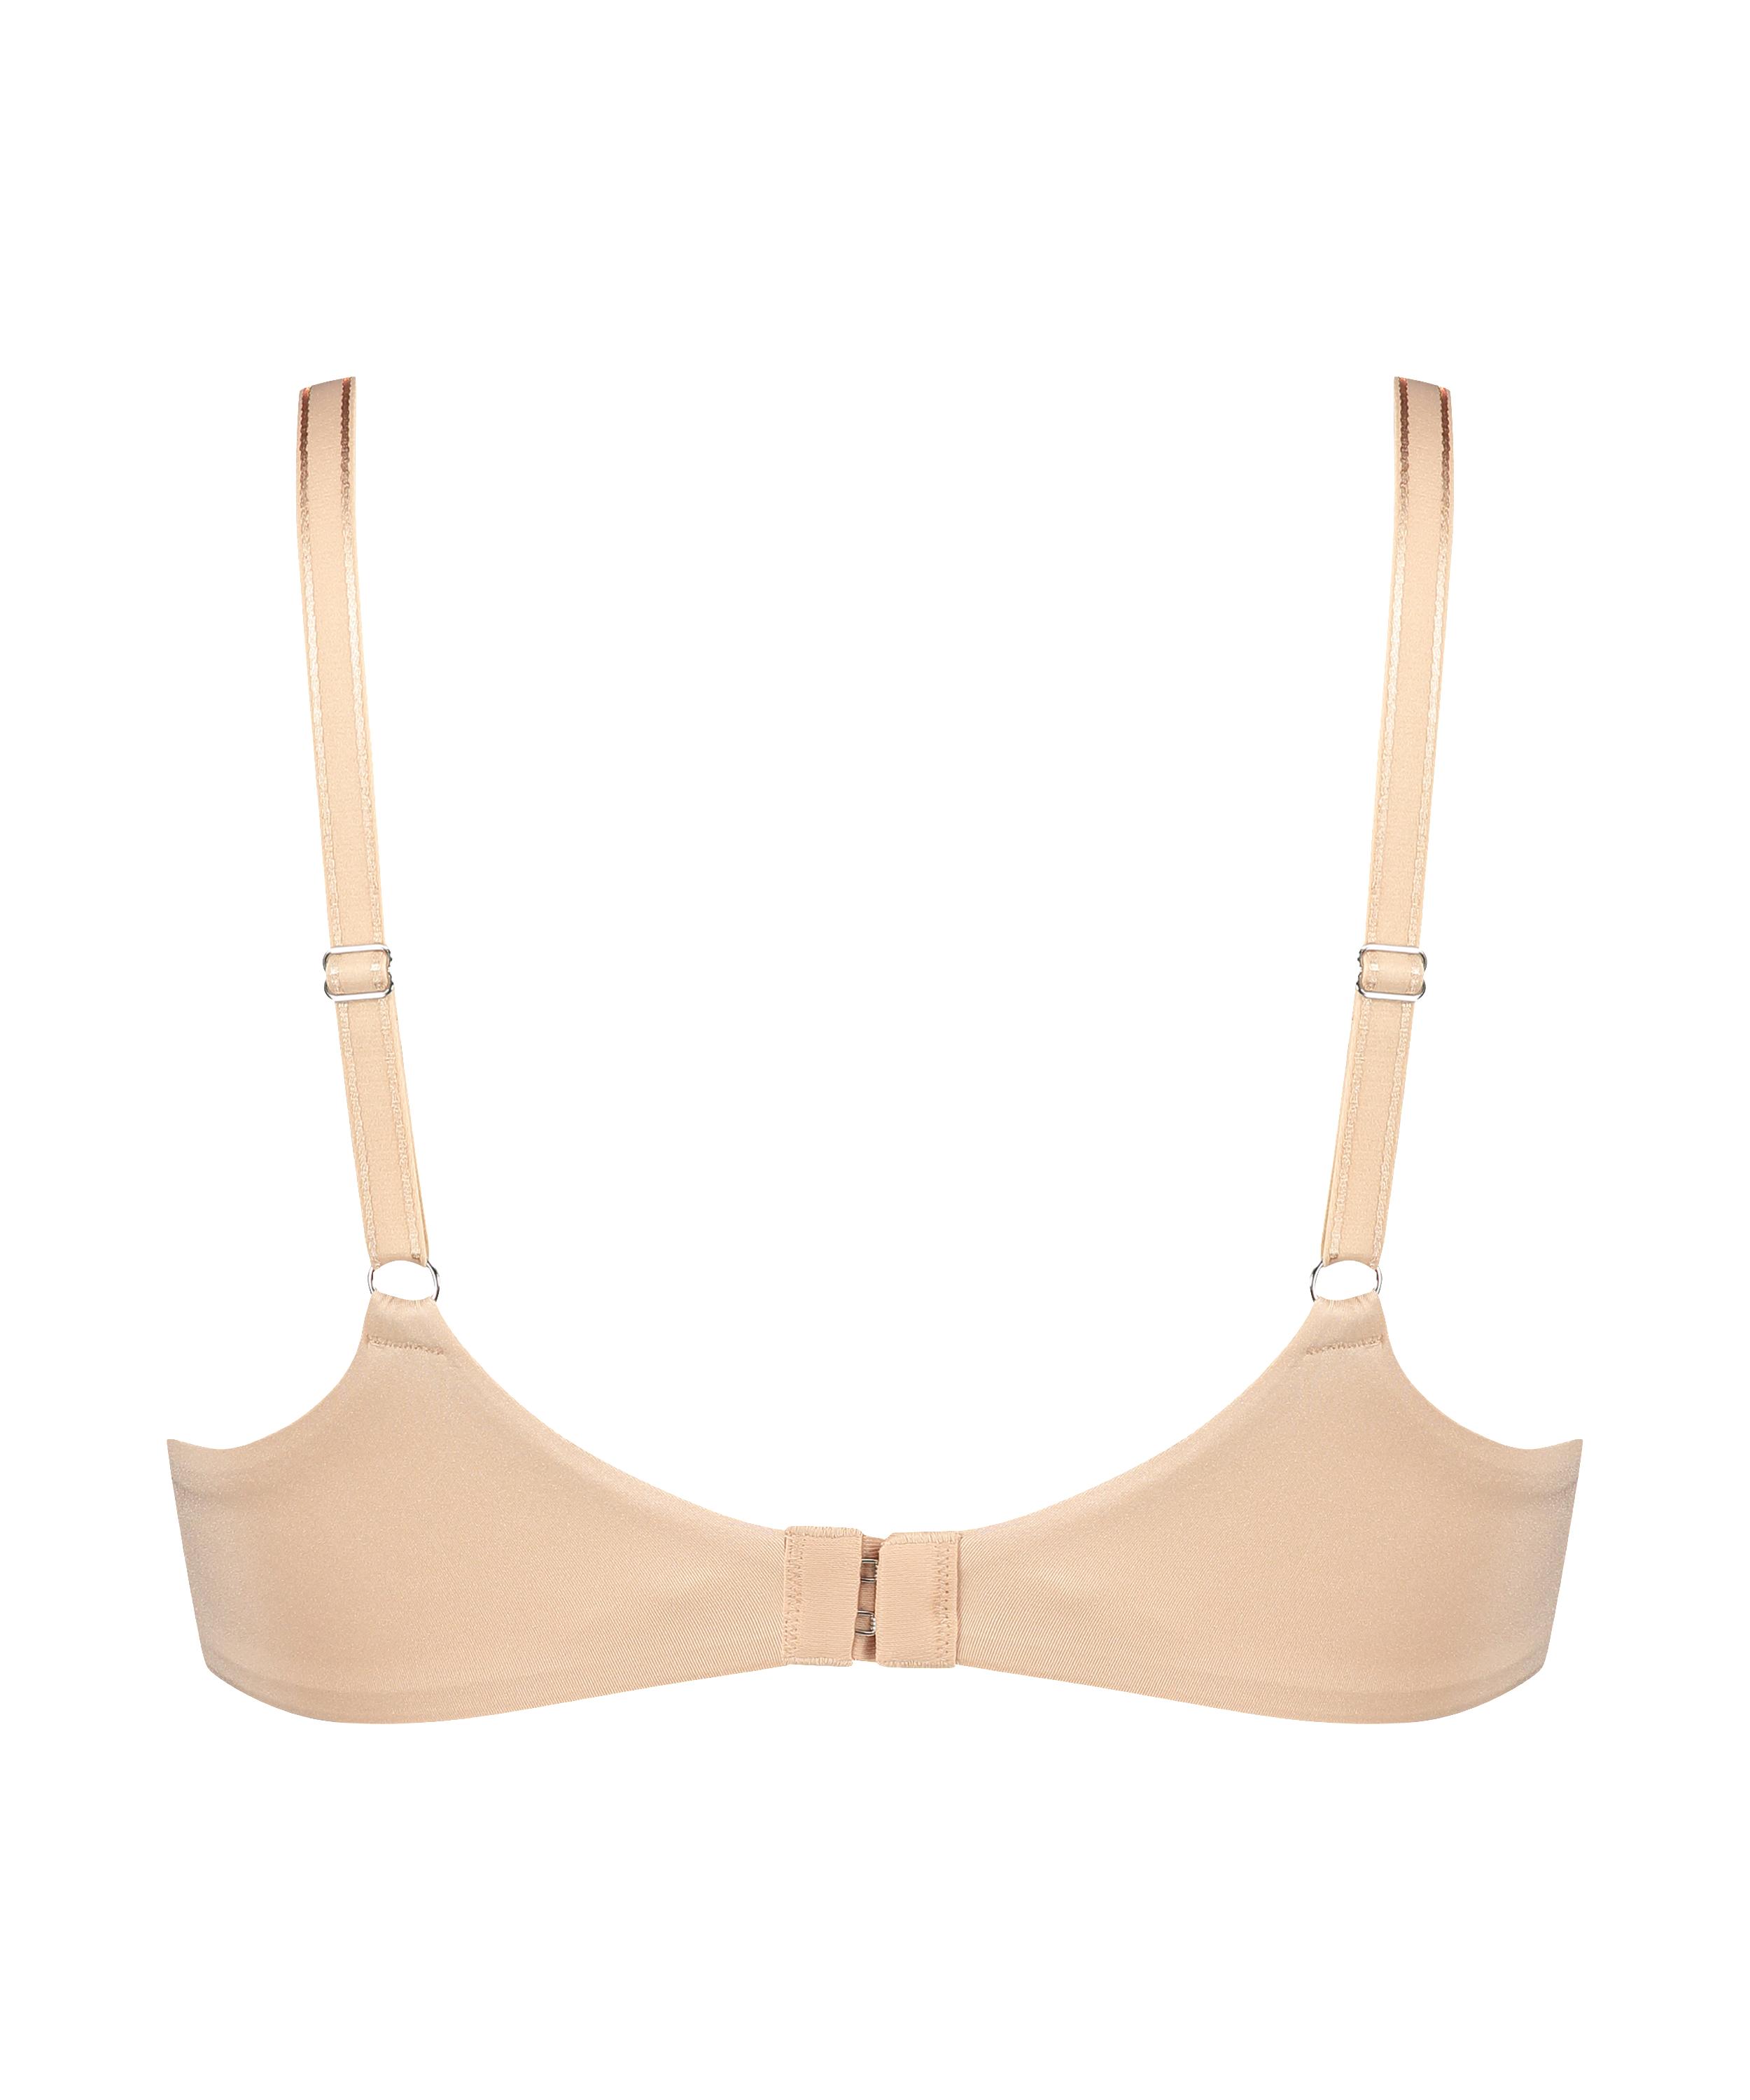 Mona Padded Non-wired Bra for £27 - Non-wired Bras - Hunkemöller